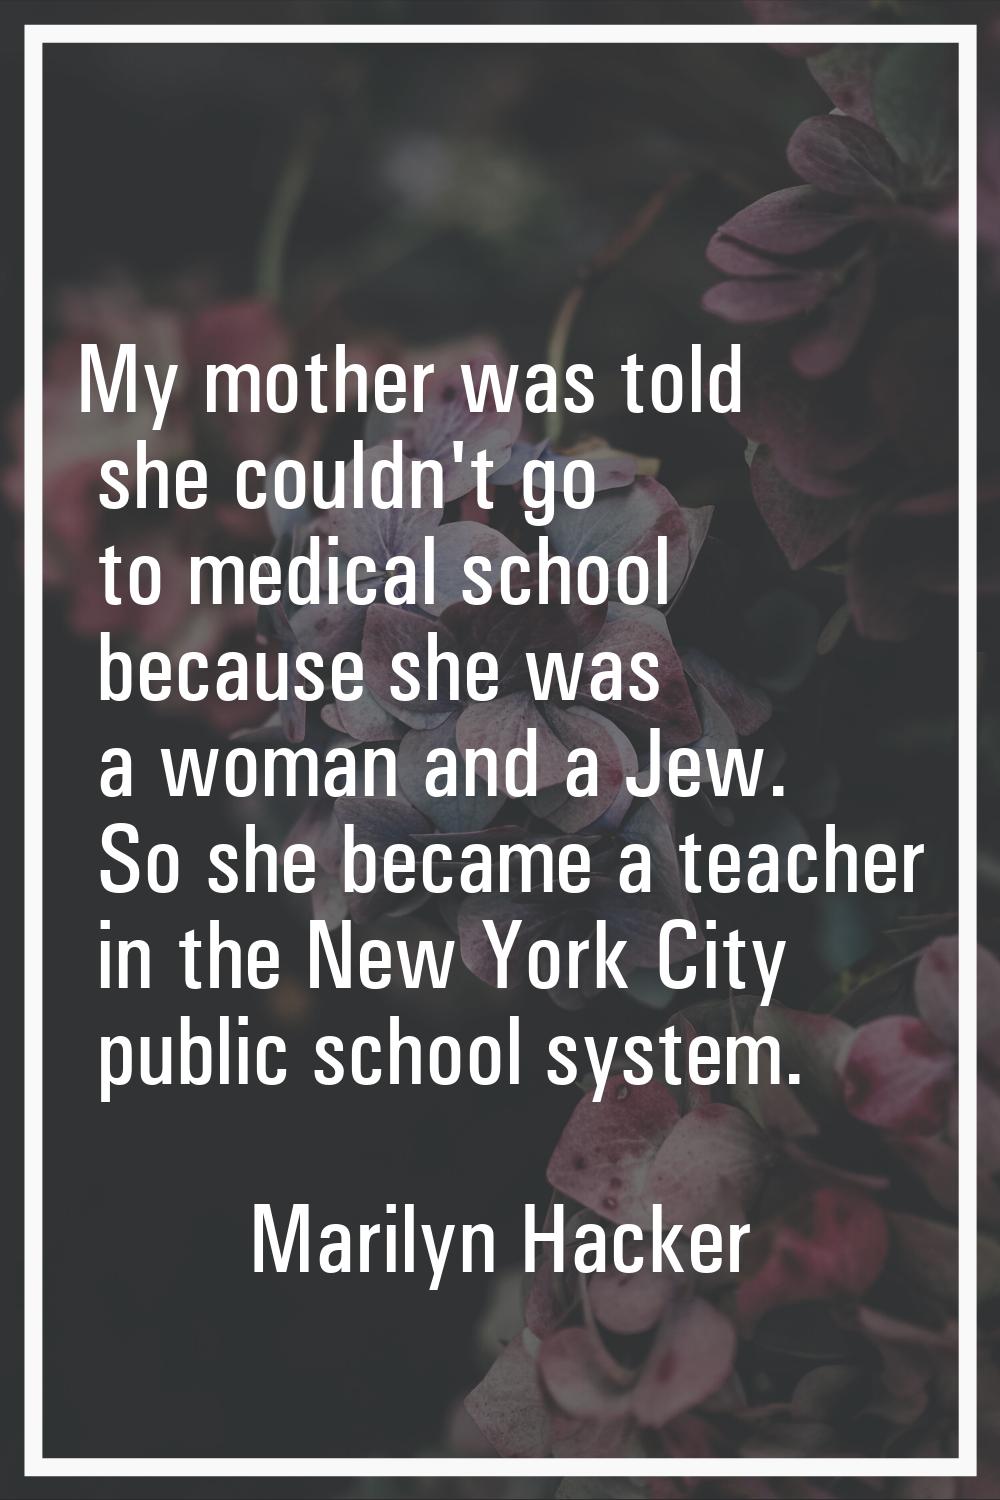 My mother was told she couldn't go to medical school because she was a woman and a Jew. So she beca